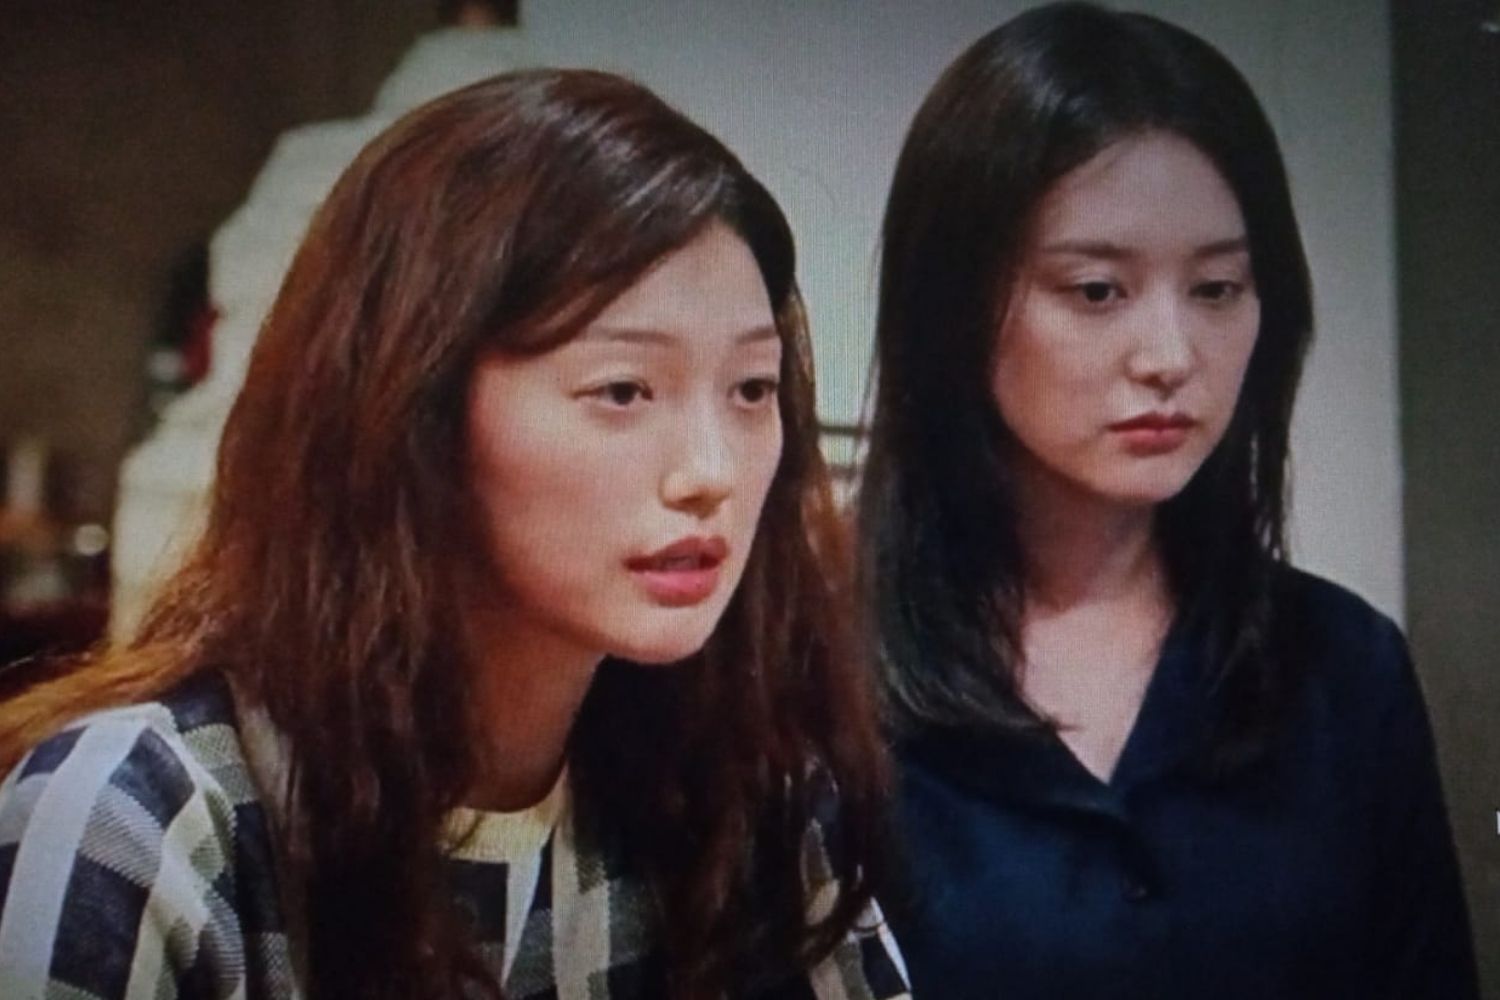 Featuring- Yeom Mi Jung and Yeom Ki Jung; The scene where Yeom Ki Jung is talking about the divorced man with a kid, she had been set up to with.